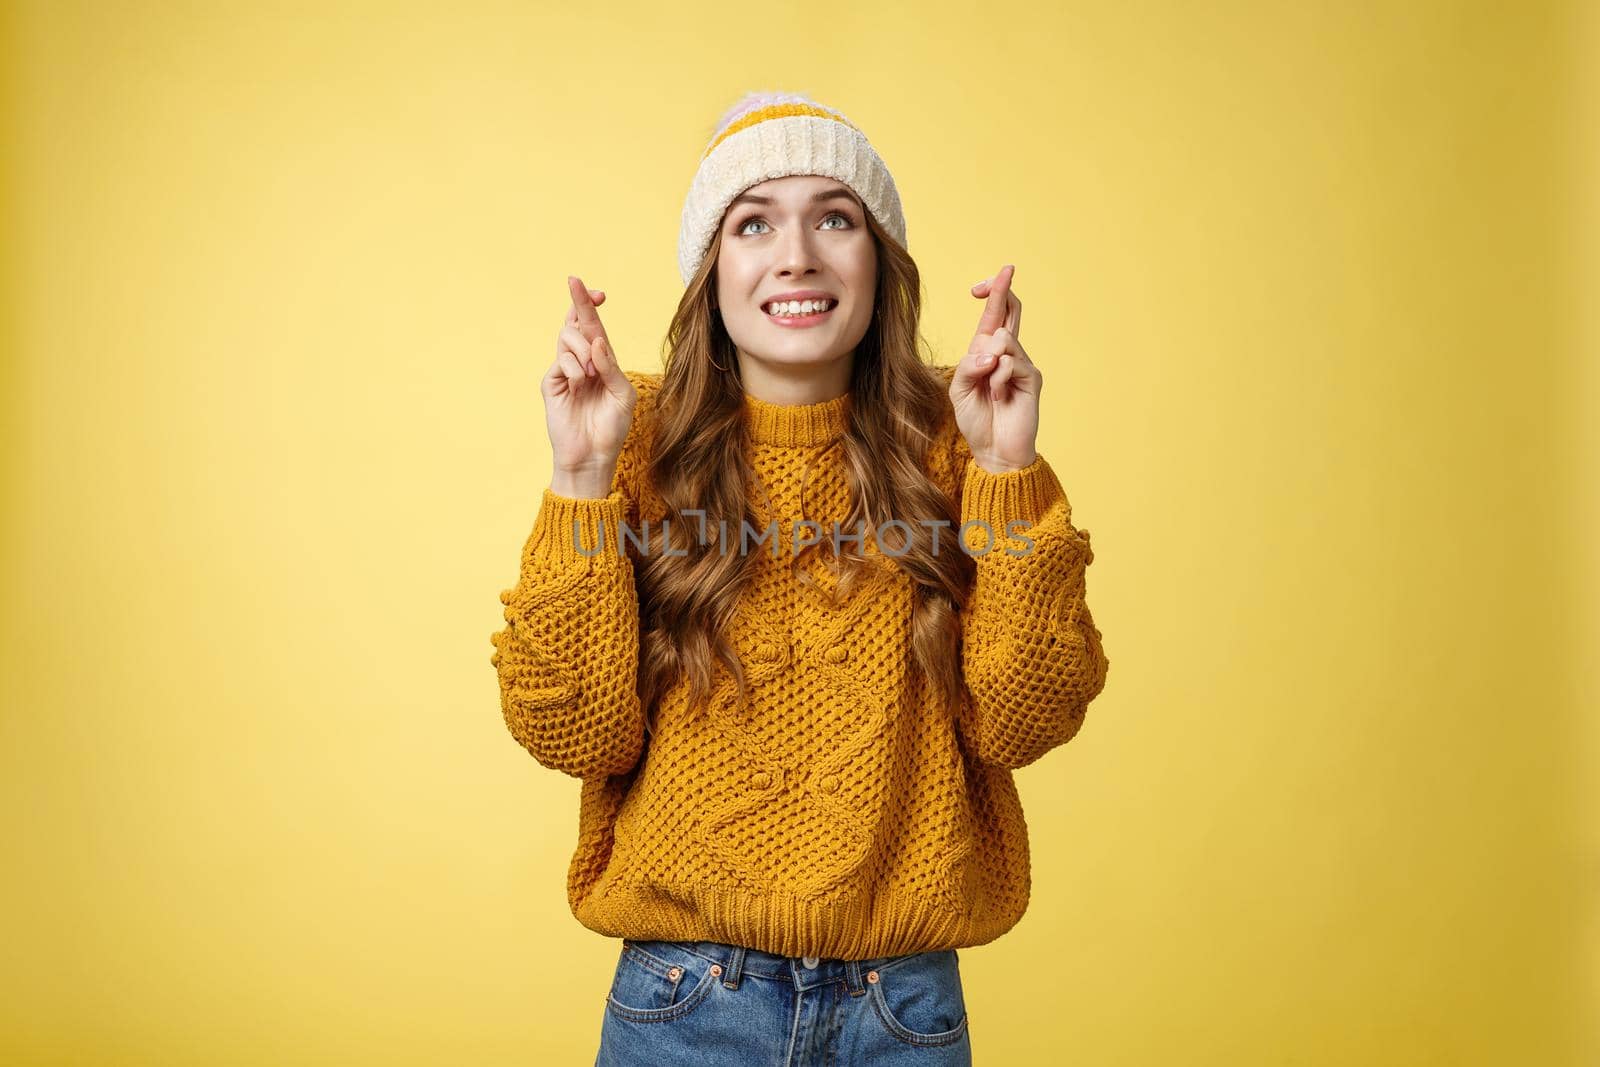 Nervous cute optimistic hopeful young attractive stylish woman praying god make wish look sky faithfully smiling cross fingers good luck wanna fulfill dream, standing anticipating yellow background.